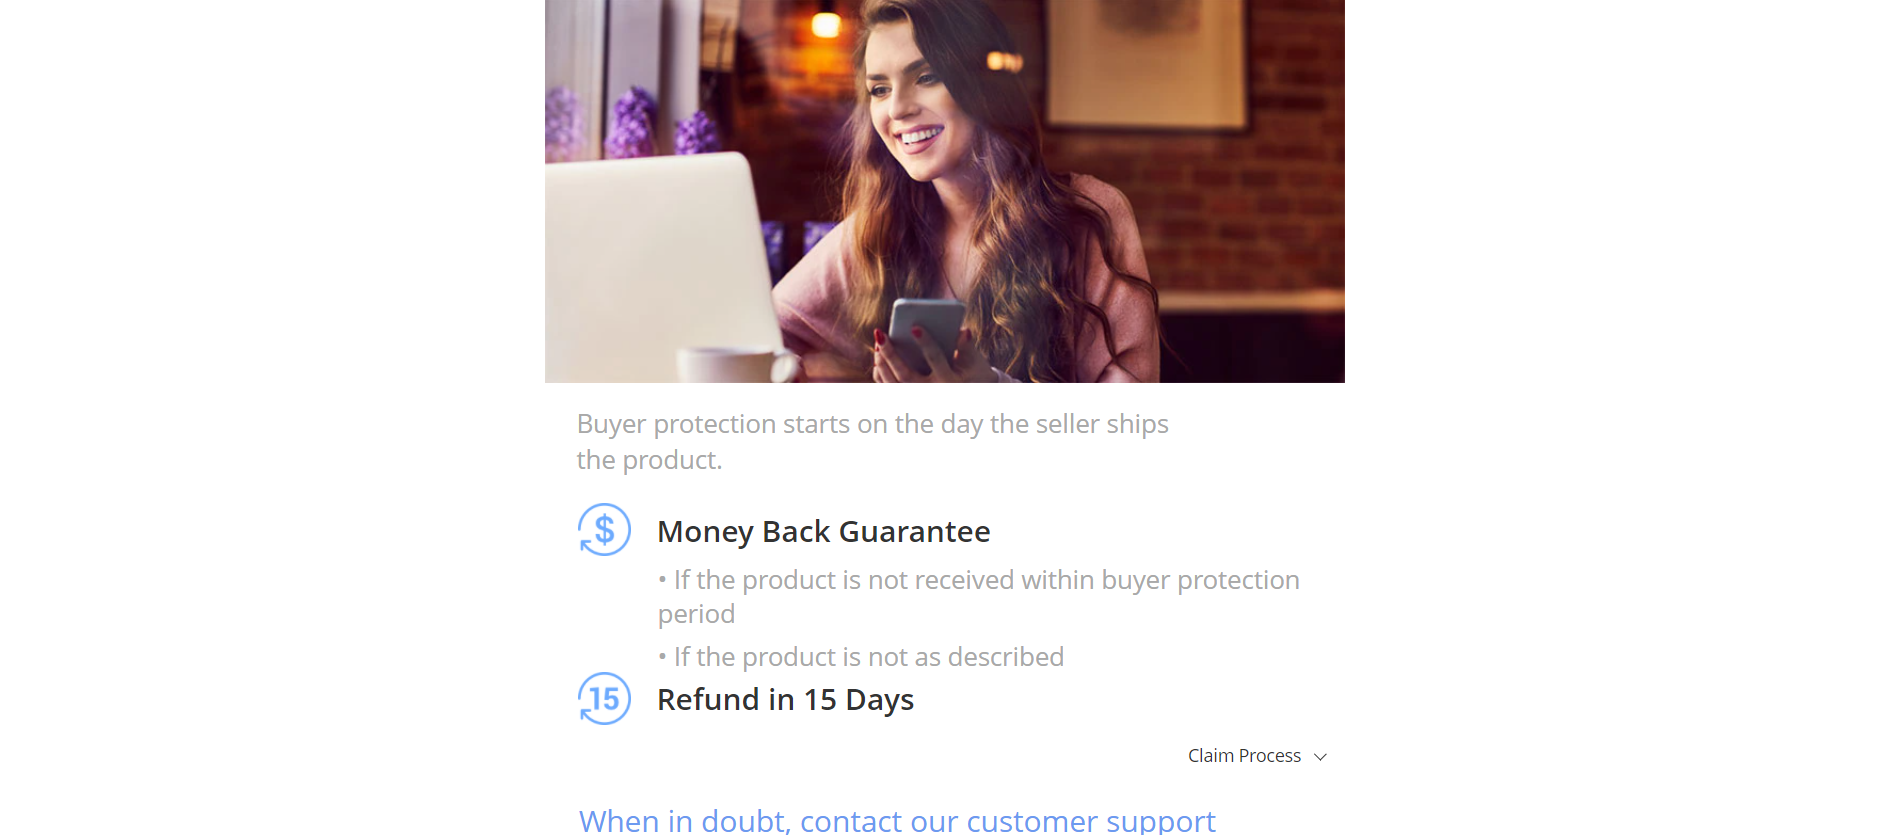 Screenshot of AliExpress buyer protection page.